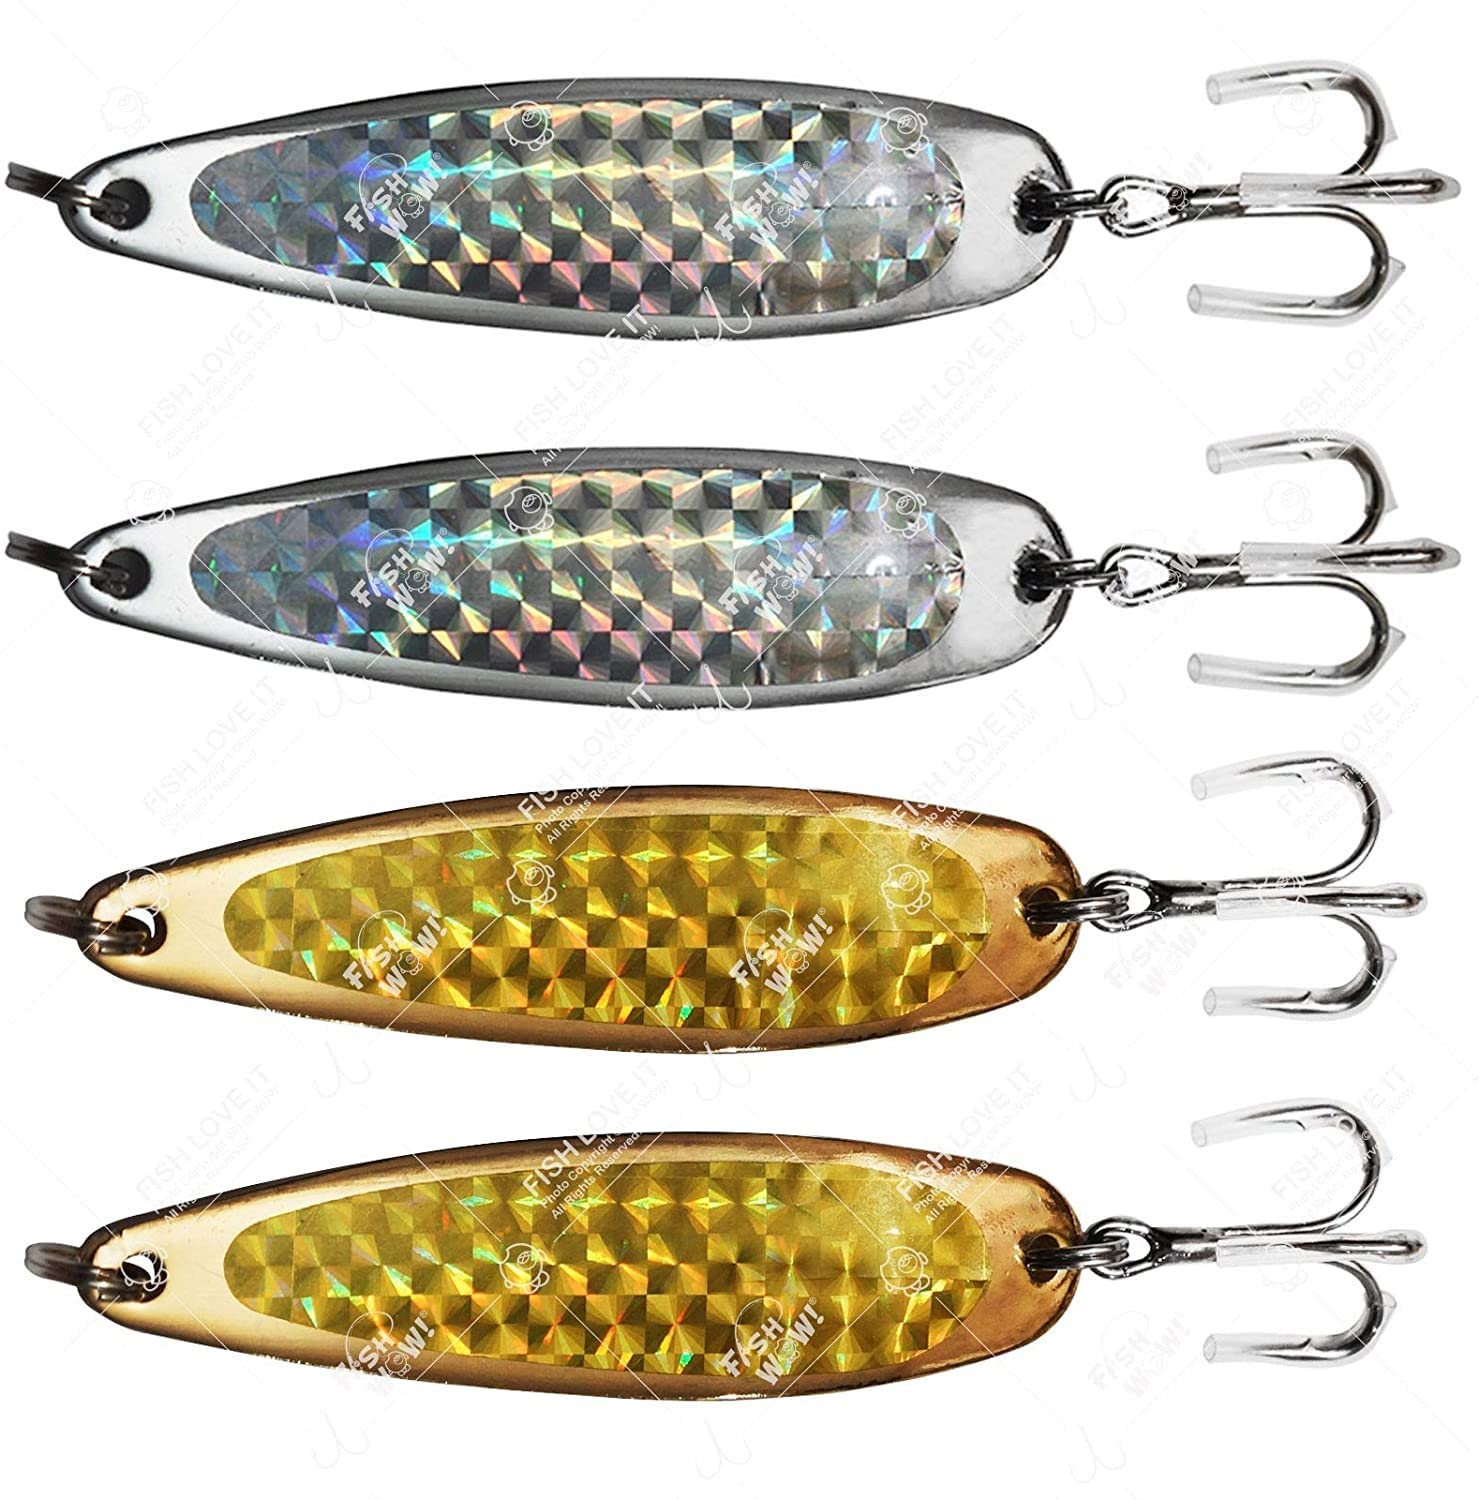 4pcs 3oz 6inch Fishing Spoon with a Treble Hook Gold & Silver - Fish Wow!